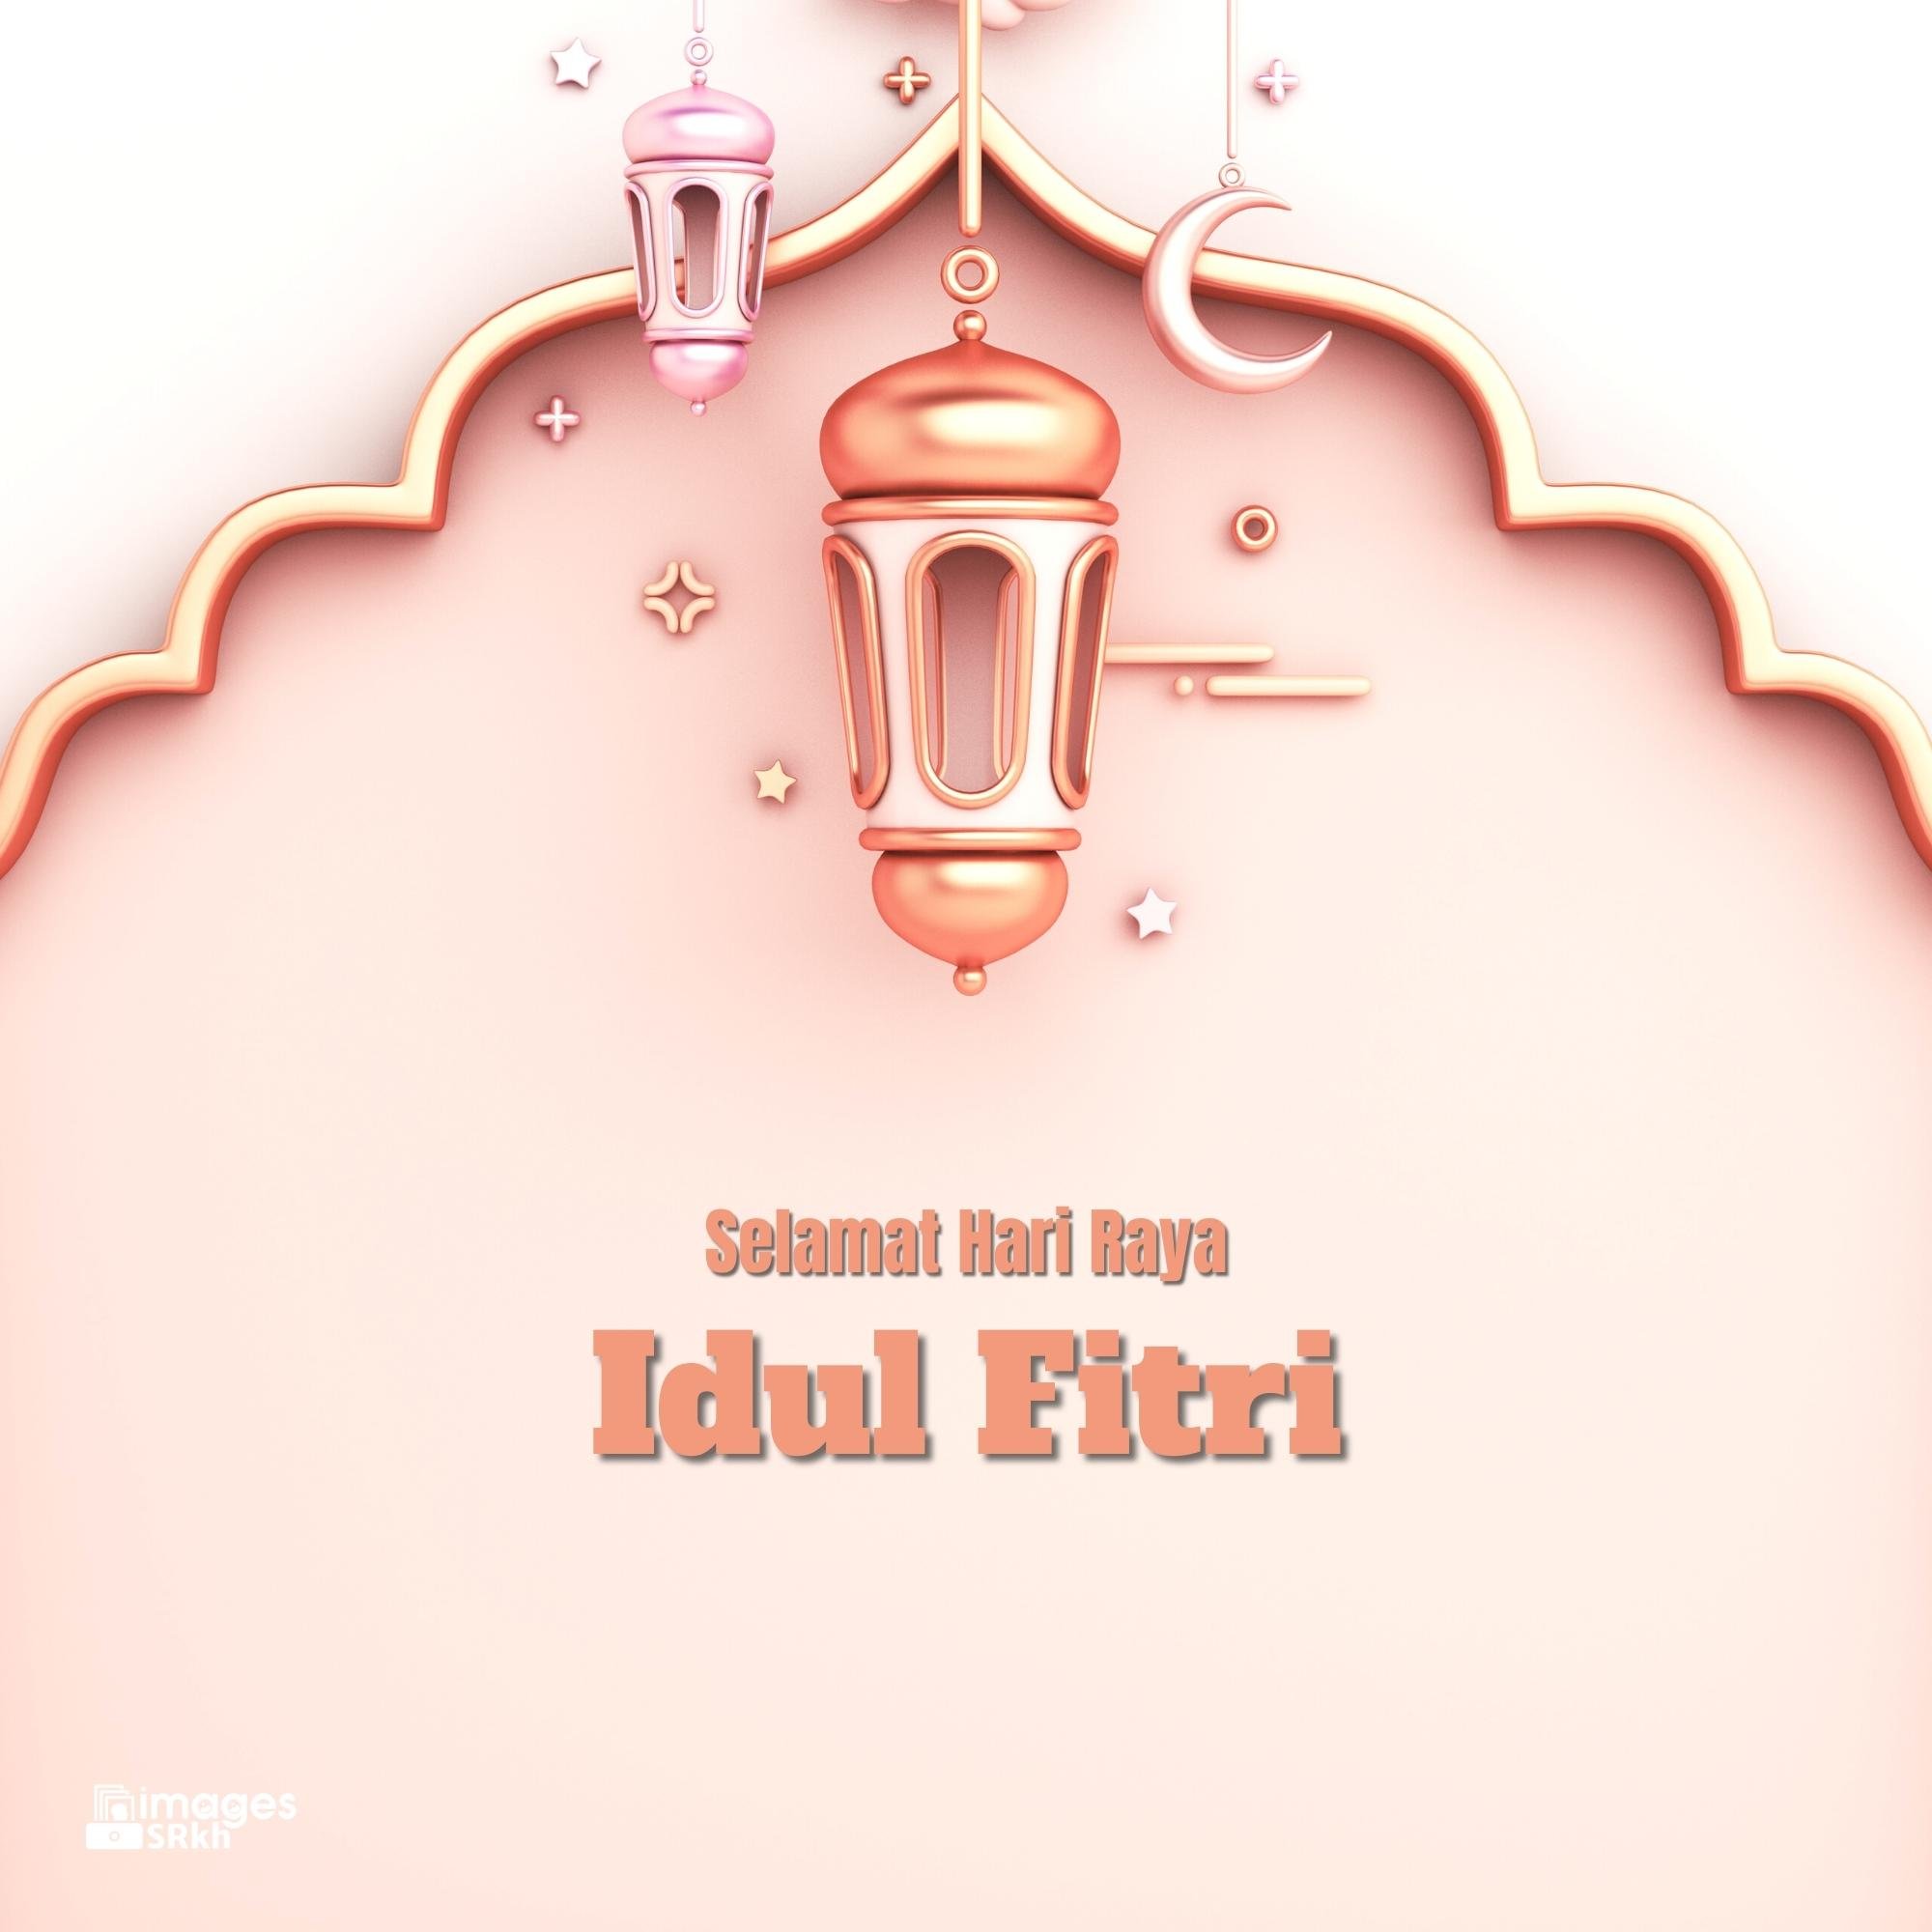 Wishes To Eid Mubarak (8) | Download free in Hd Quality | imagesSRkh